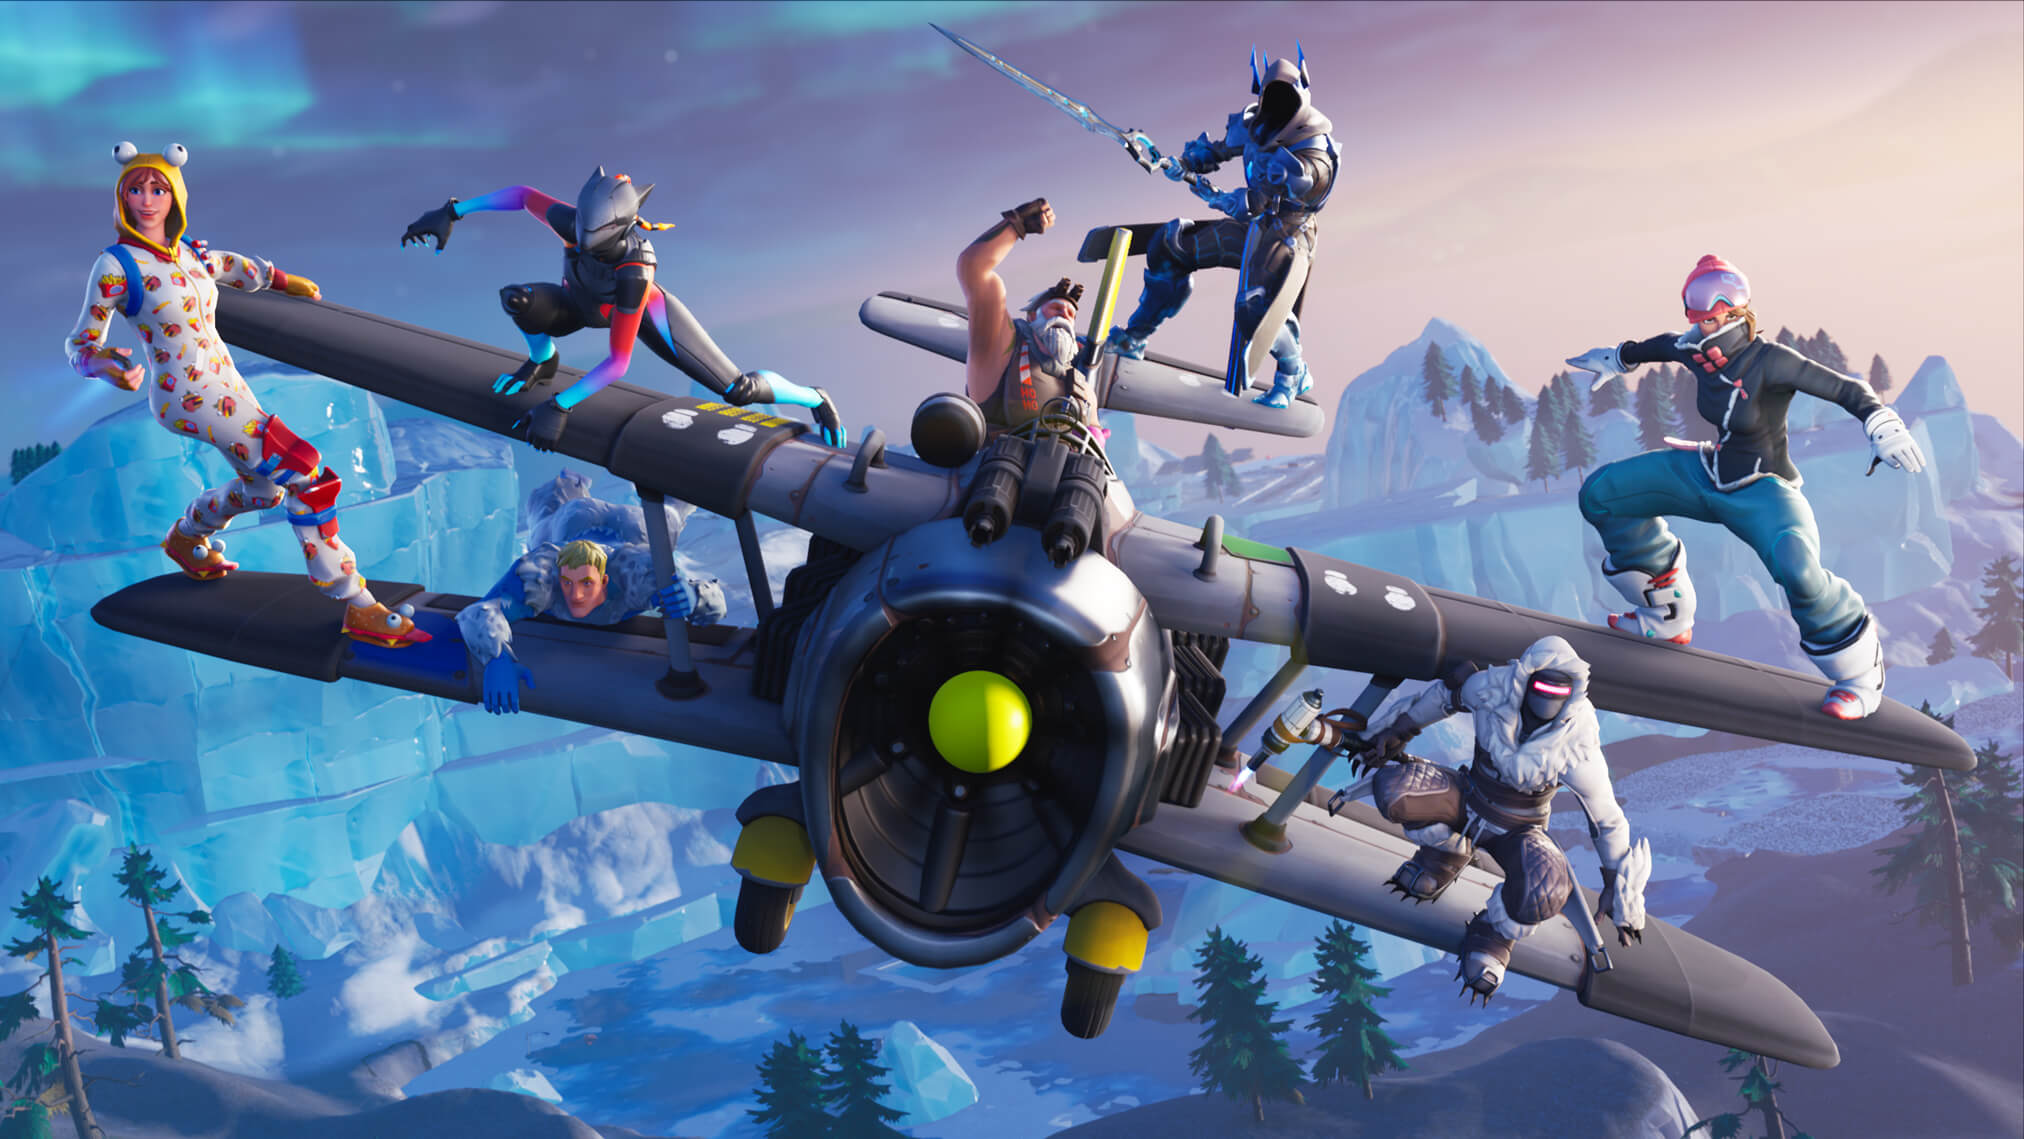 Get a First Look at Fortnite Gameplay on PS5 With UE4 